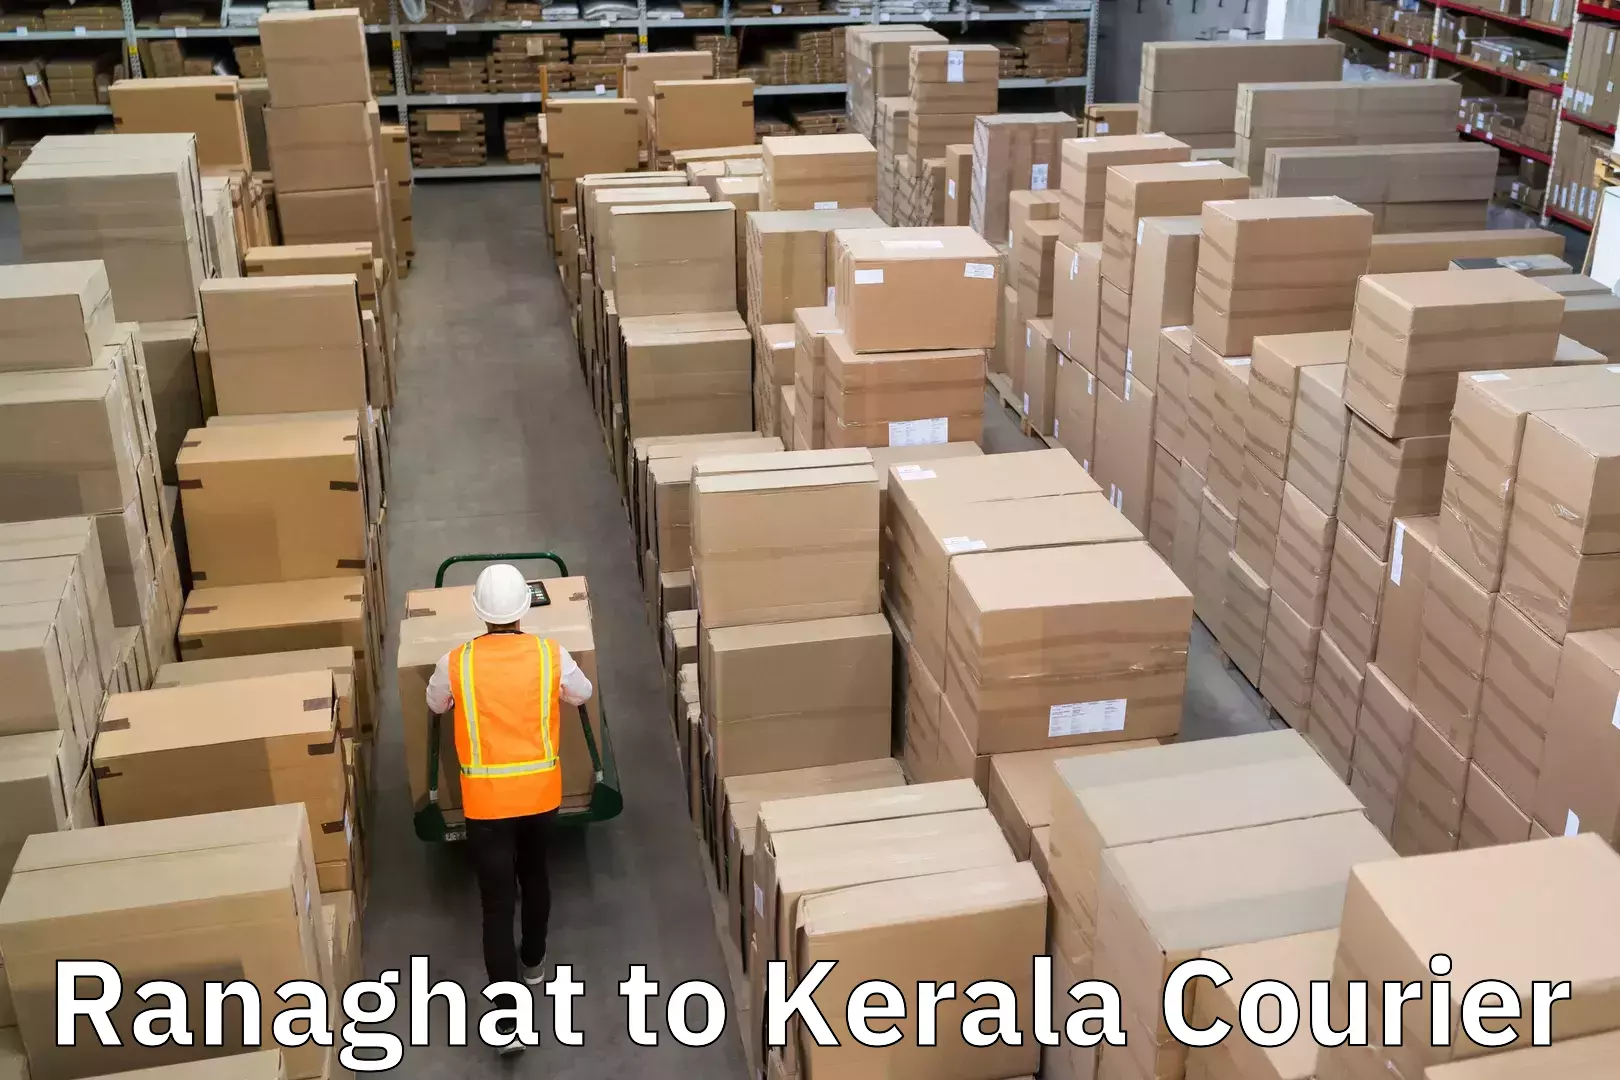 High-capacity parcel service Ranaghat to Kerala